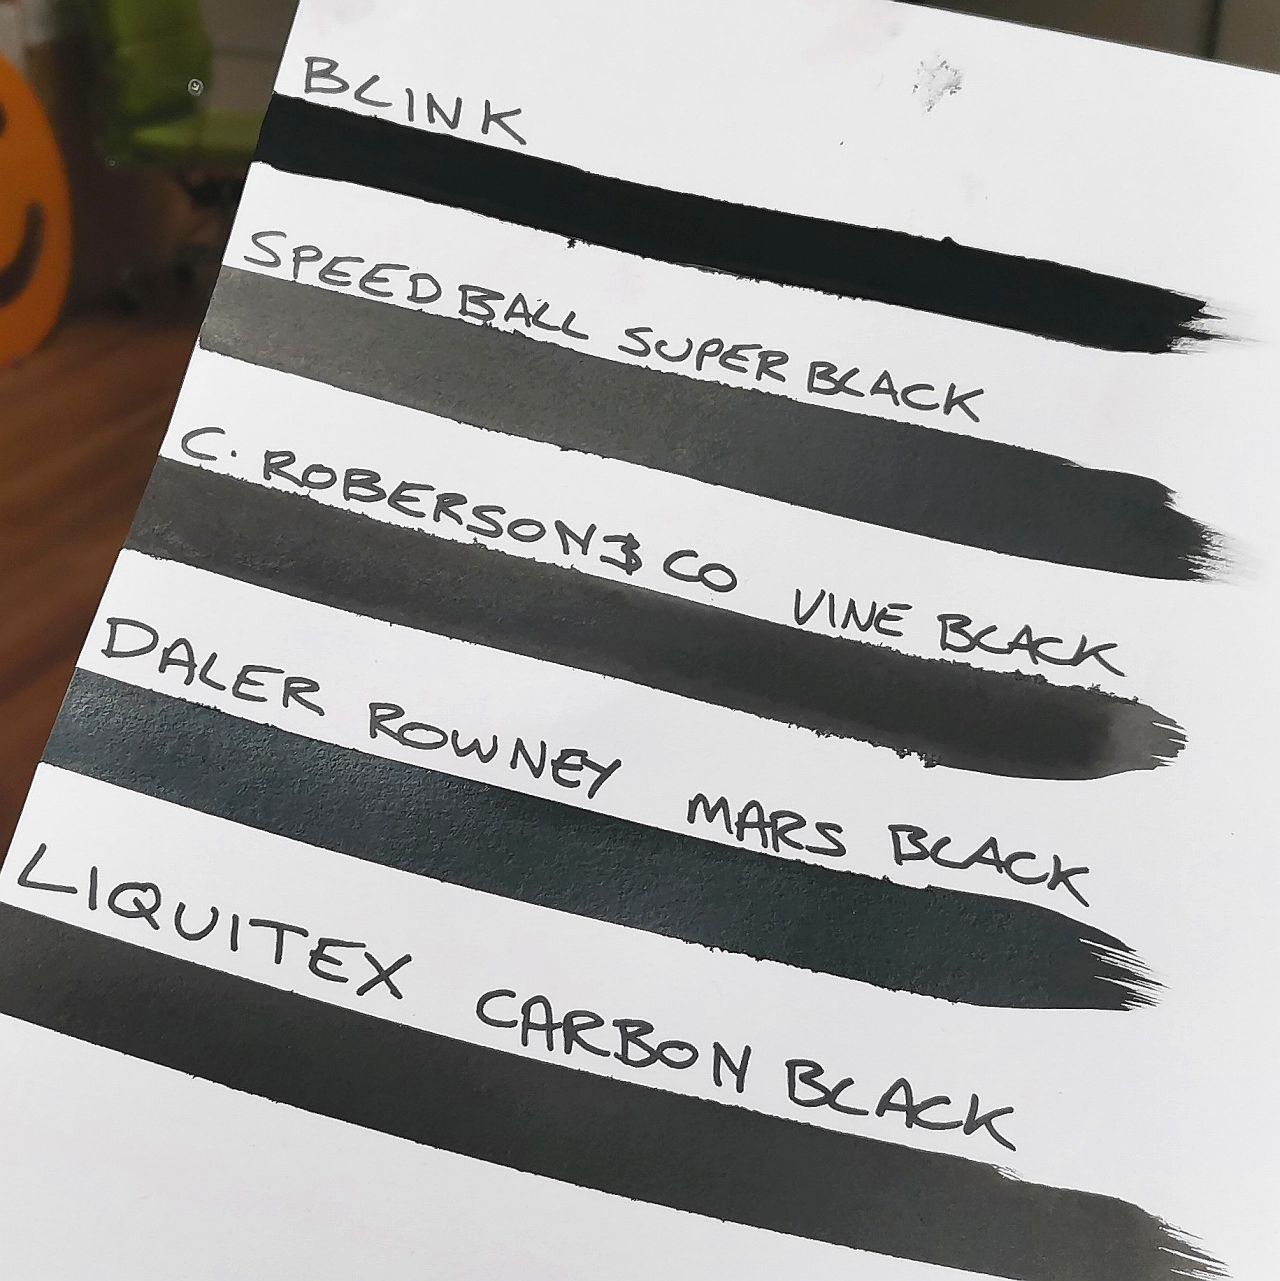 A comparison of Culture Hustle's 'Blink' to other black inks on the market.